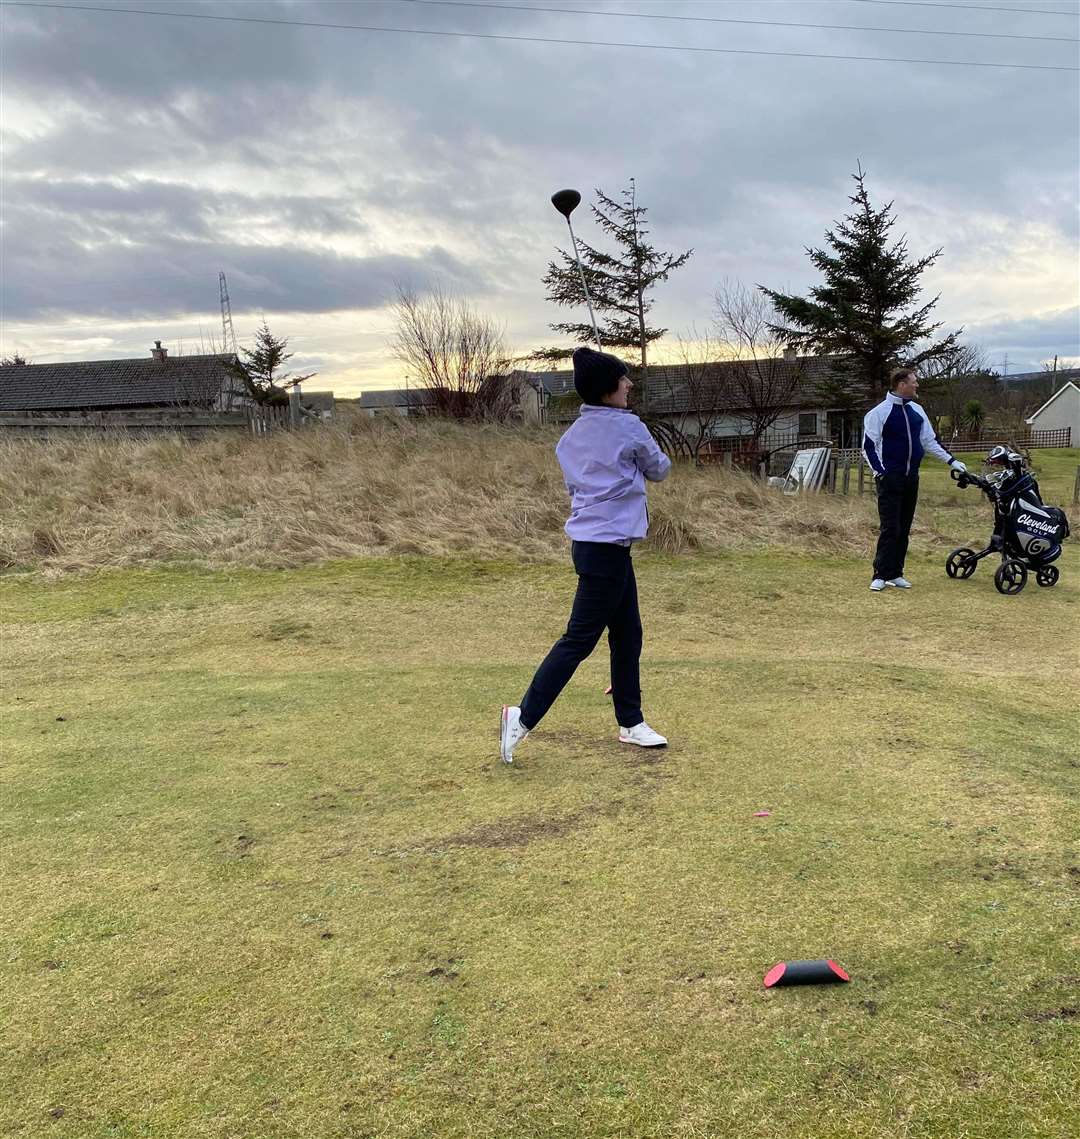 Eilidh Paterson, winner of the ladies' February Medal at Reay, teeing off at the 16th hole. She was inspired by some of the 'come and try' sessions run by the club.